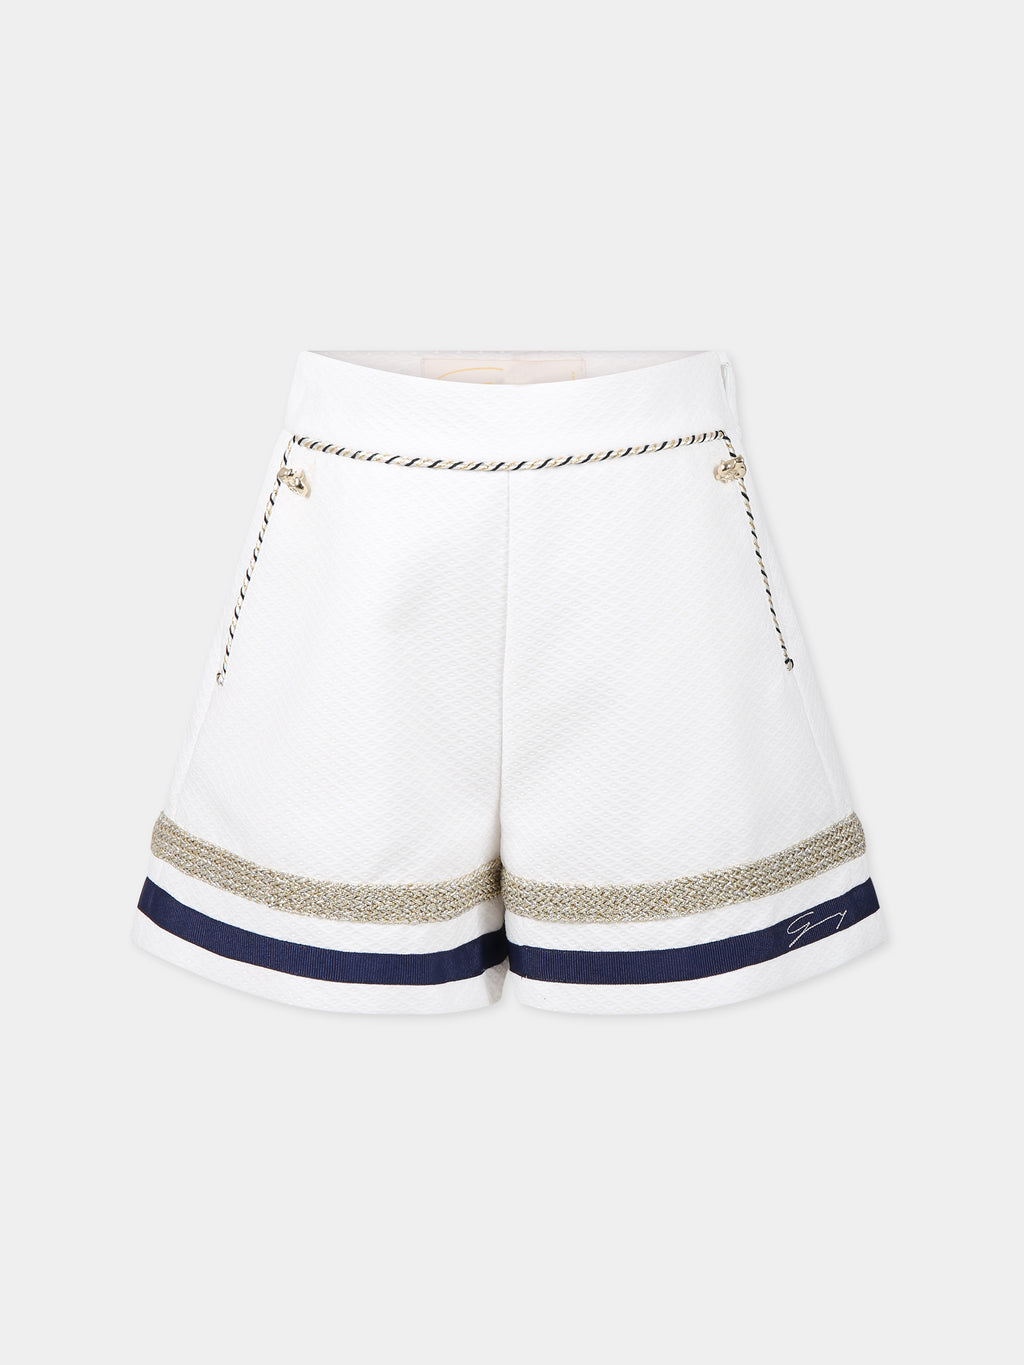 White shorts for girl with blue and lurex details